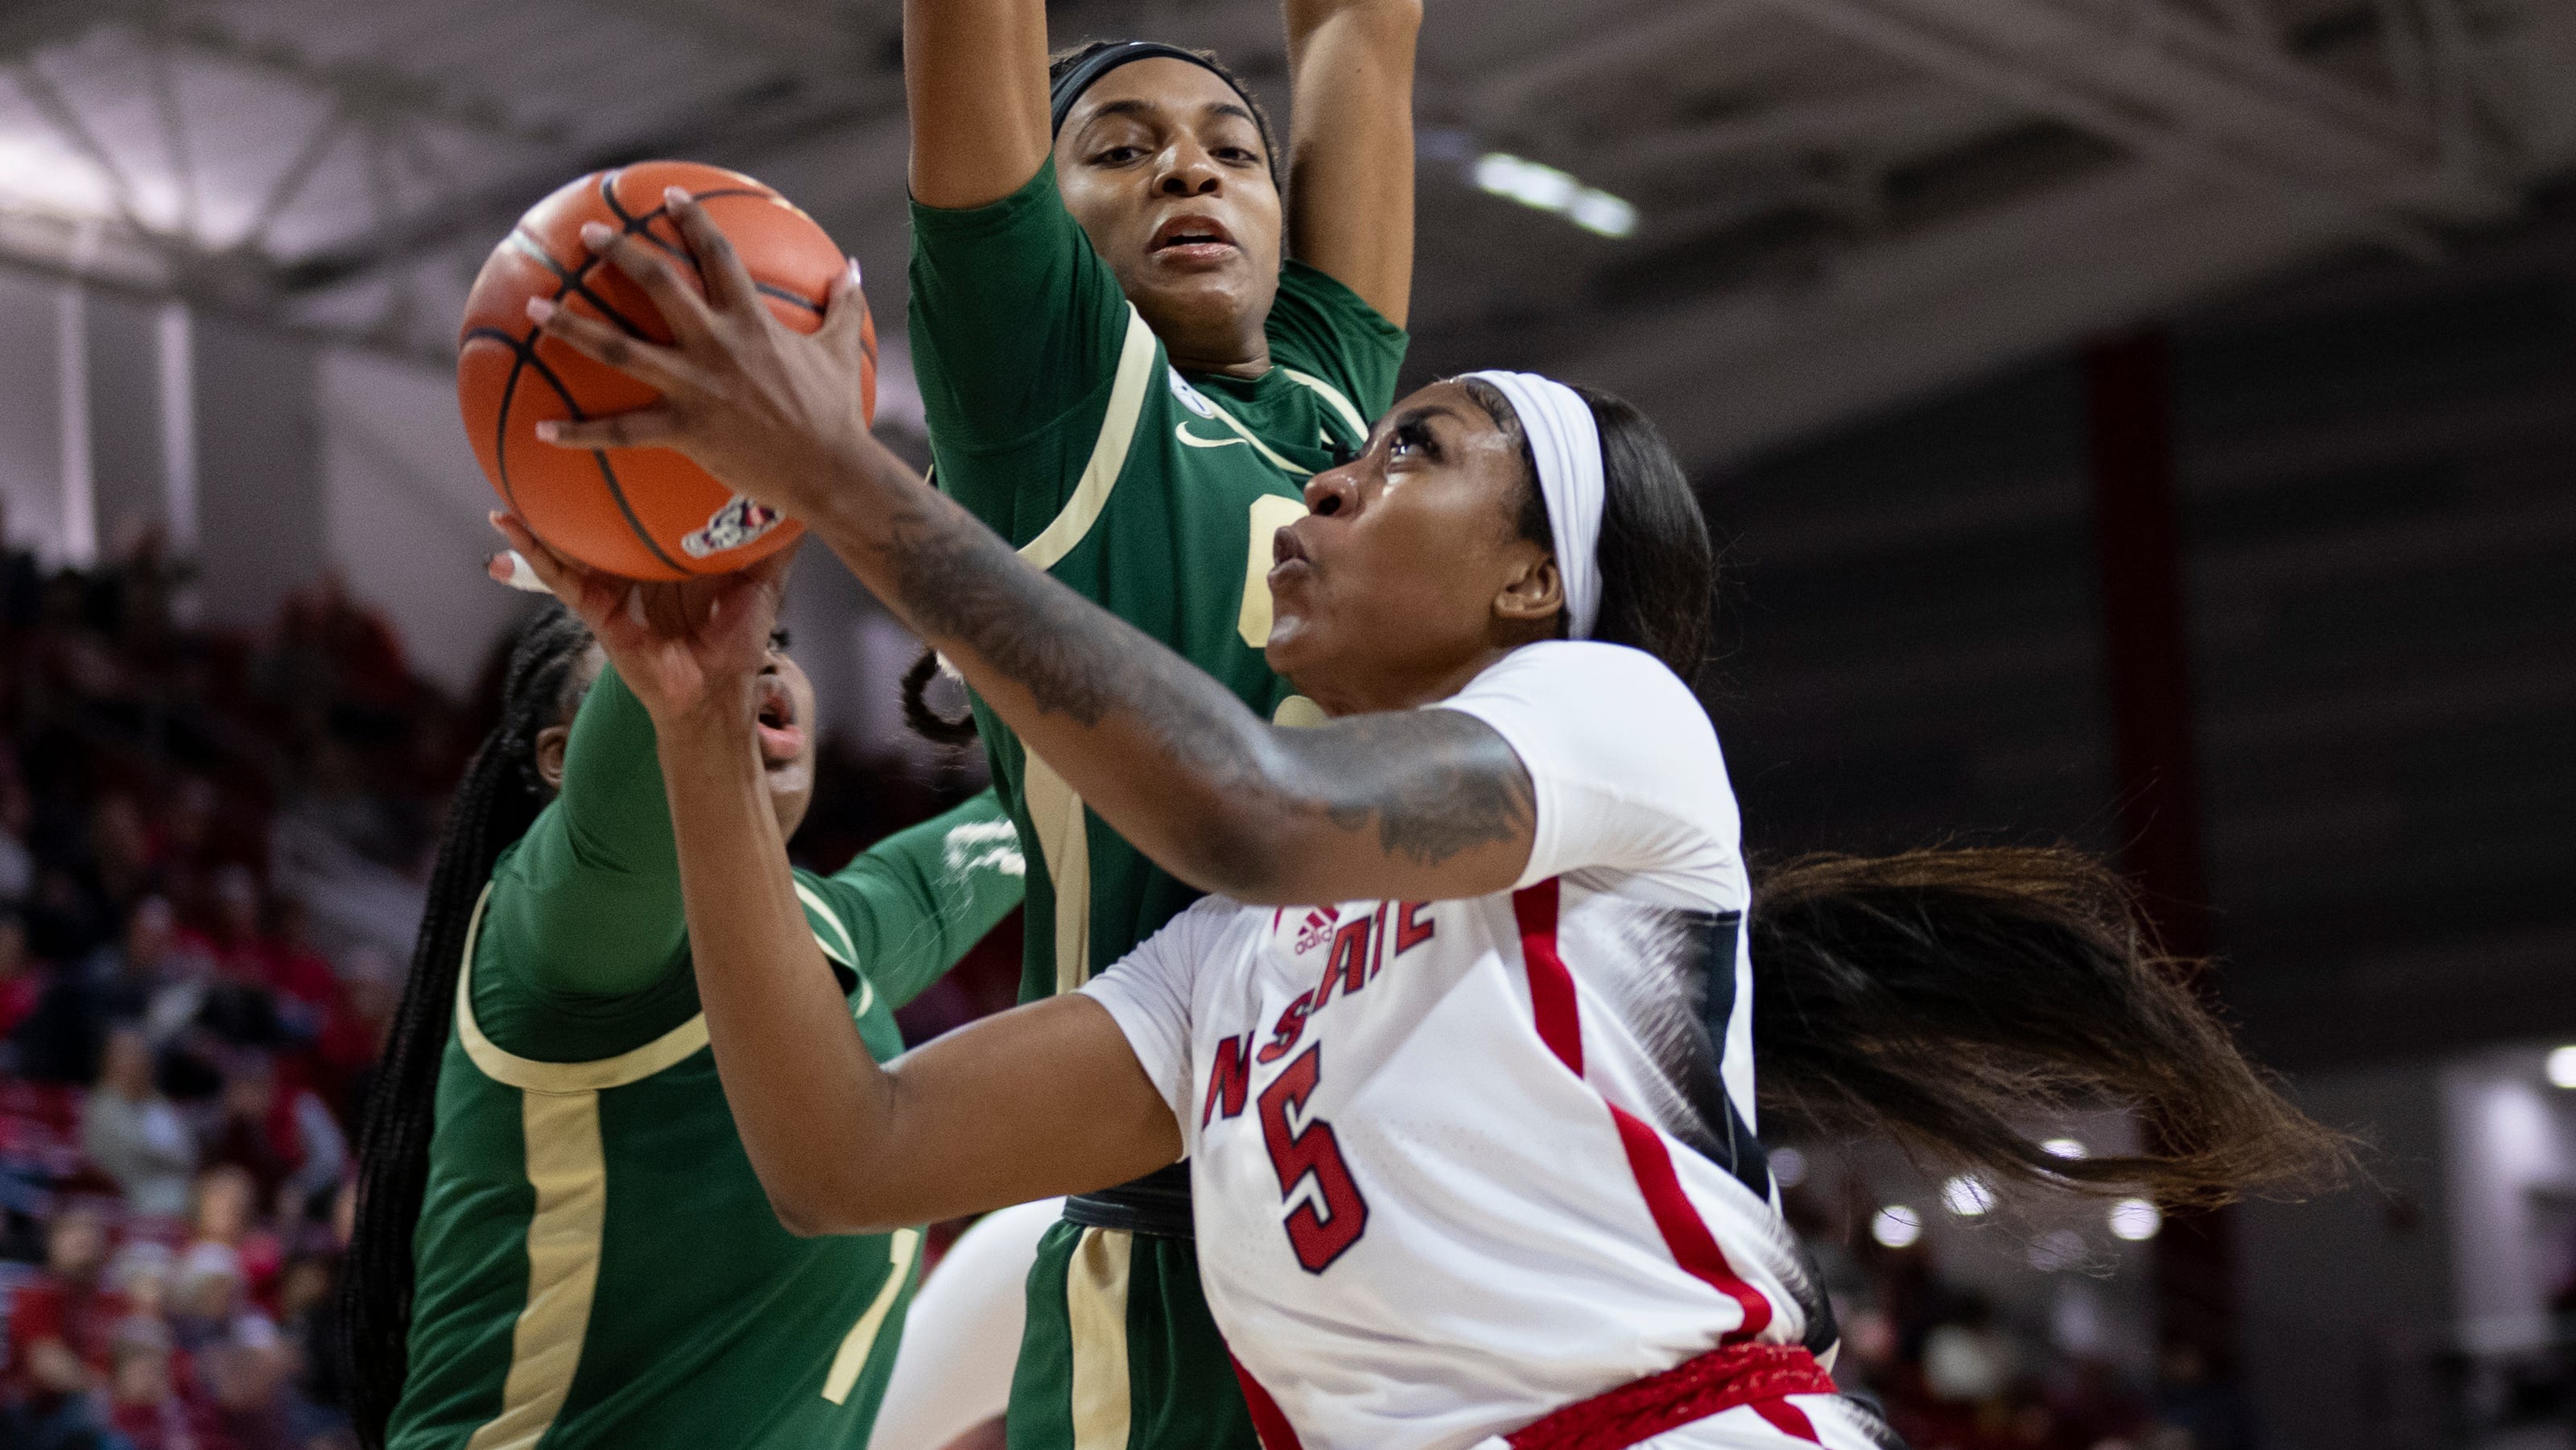 NC State women's basketball at UConn in Elite Eight rematch